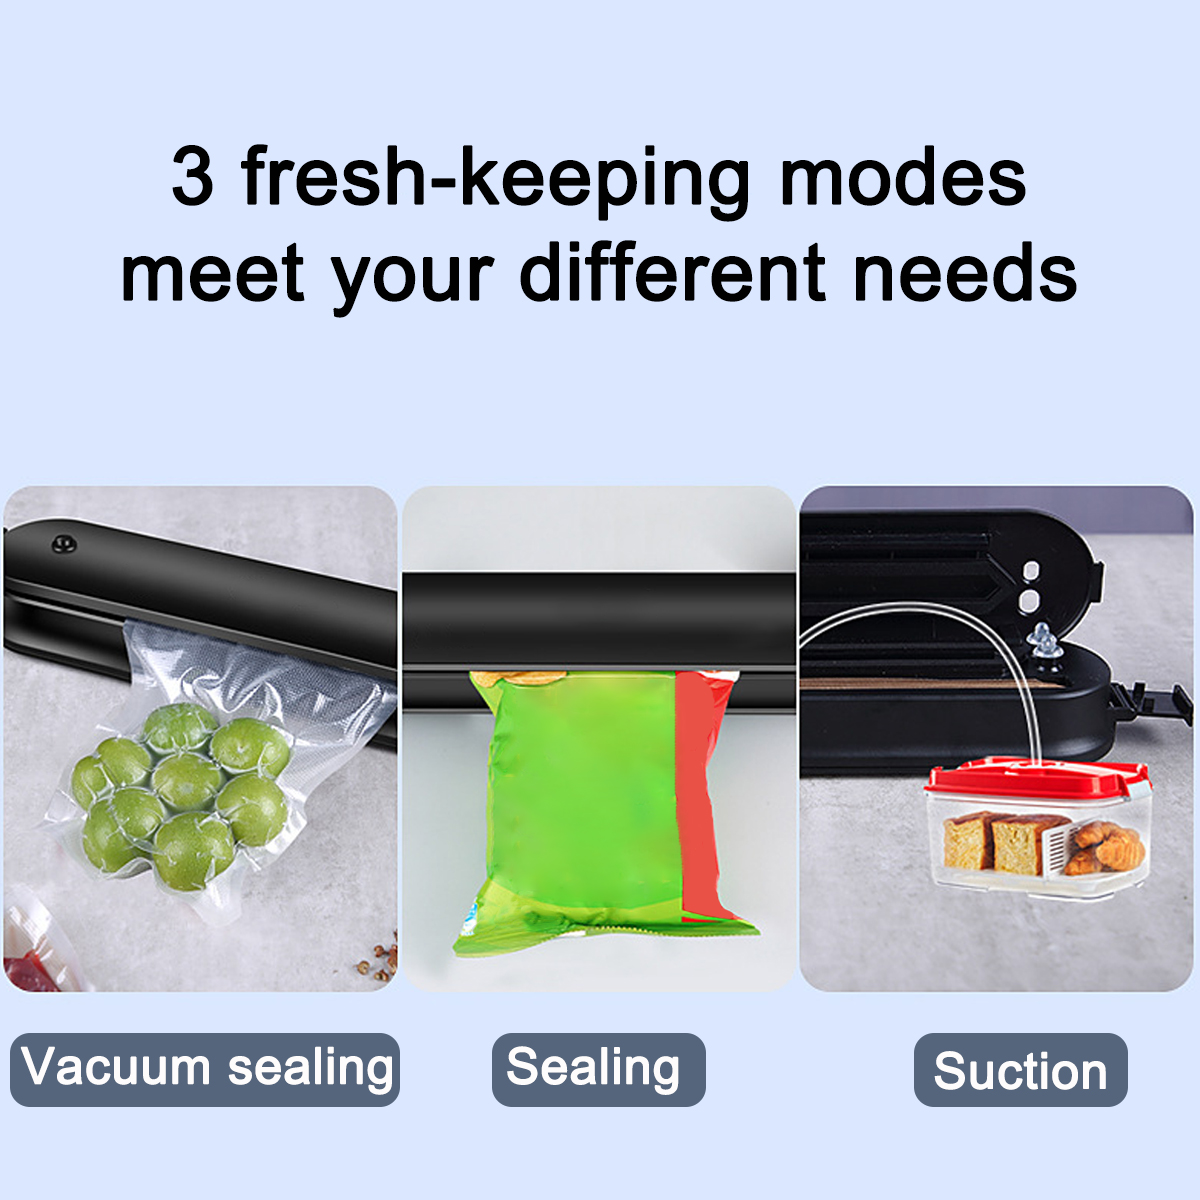 Electric-Food-Vacuum-Sealer-Powerful-Motor-Quick-Sealing-3-Fresh-keeping-Modes-for-Food-Preservation-1905323-3